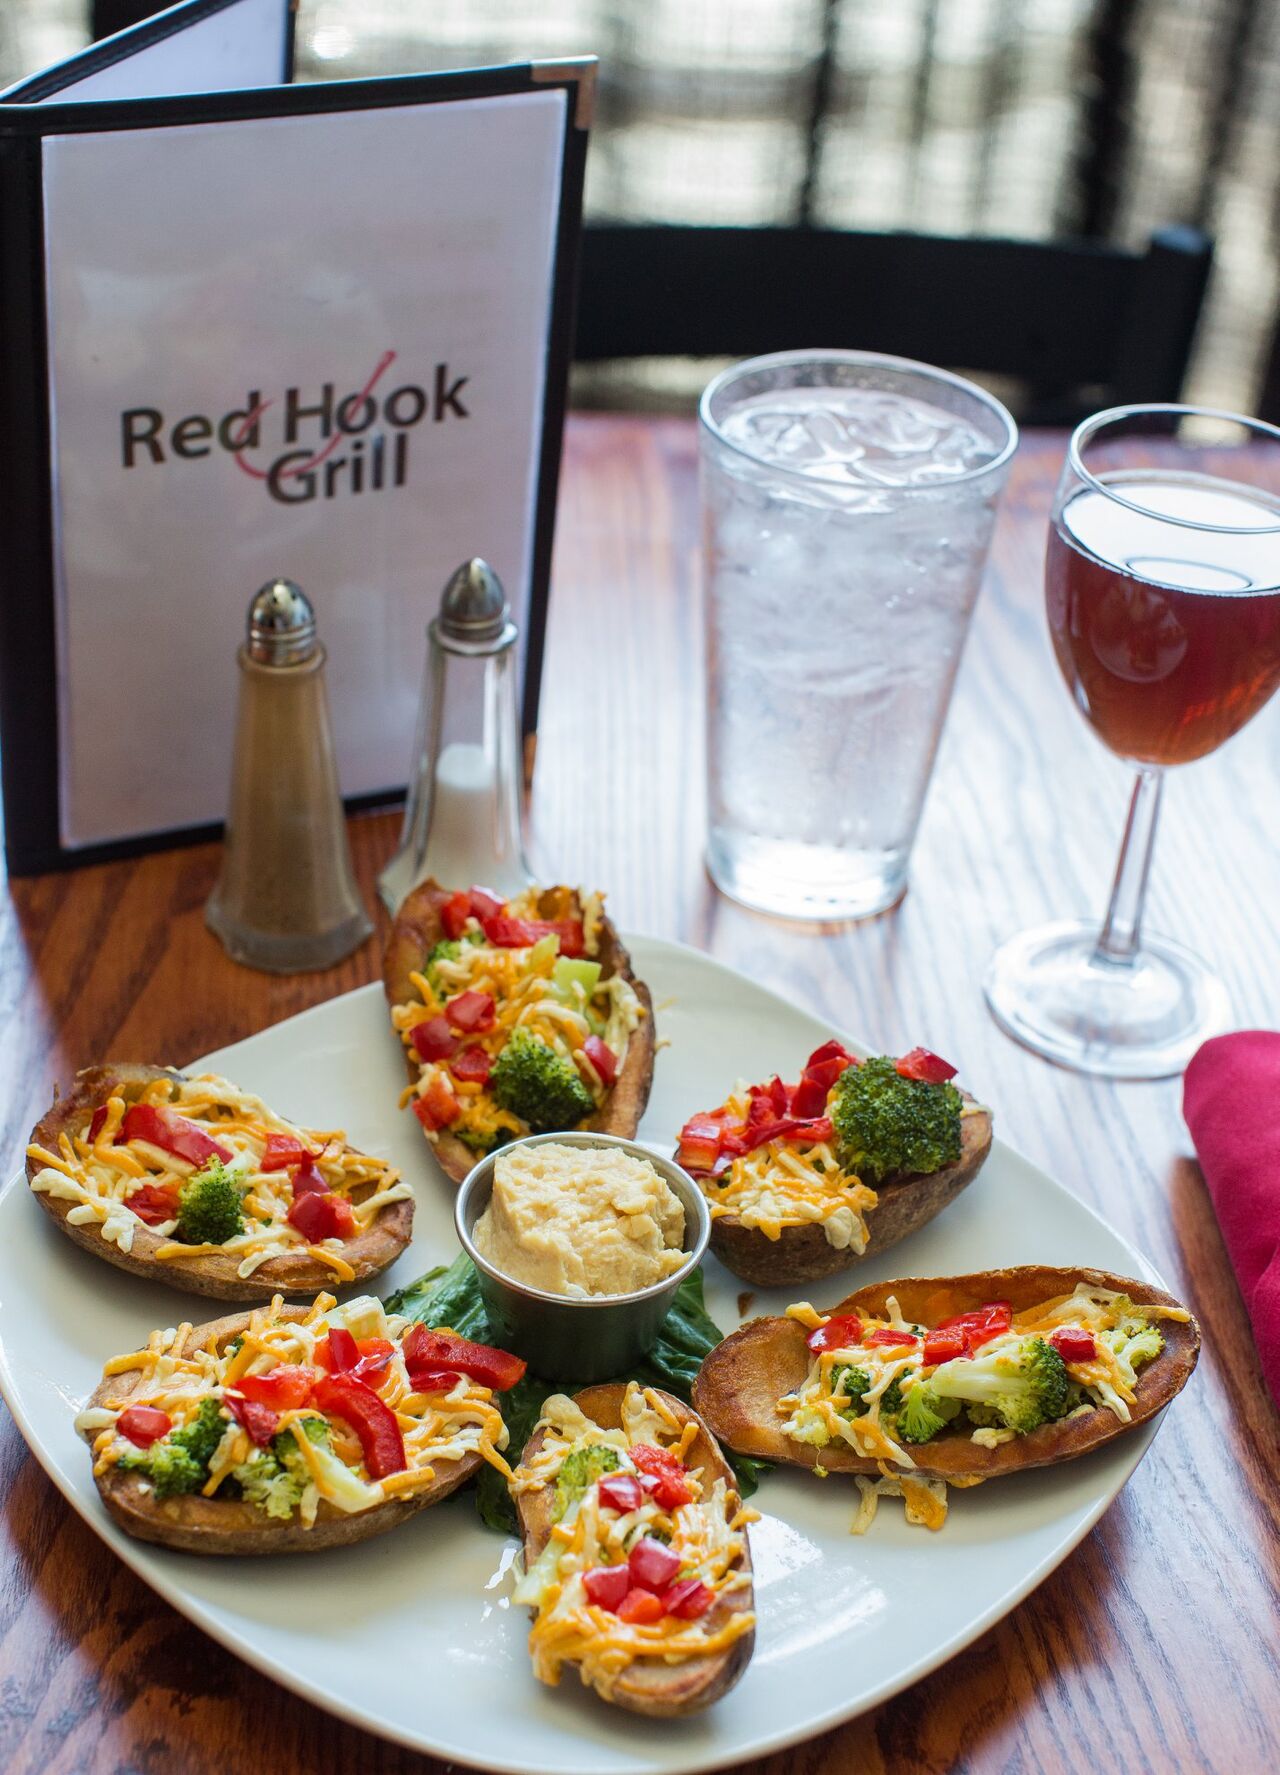 A photo of Red Hook Grill